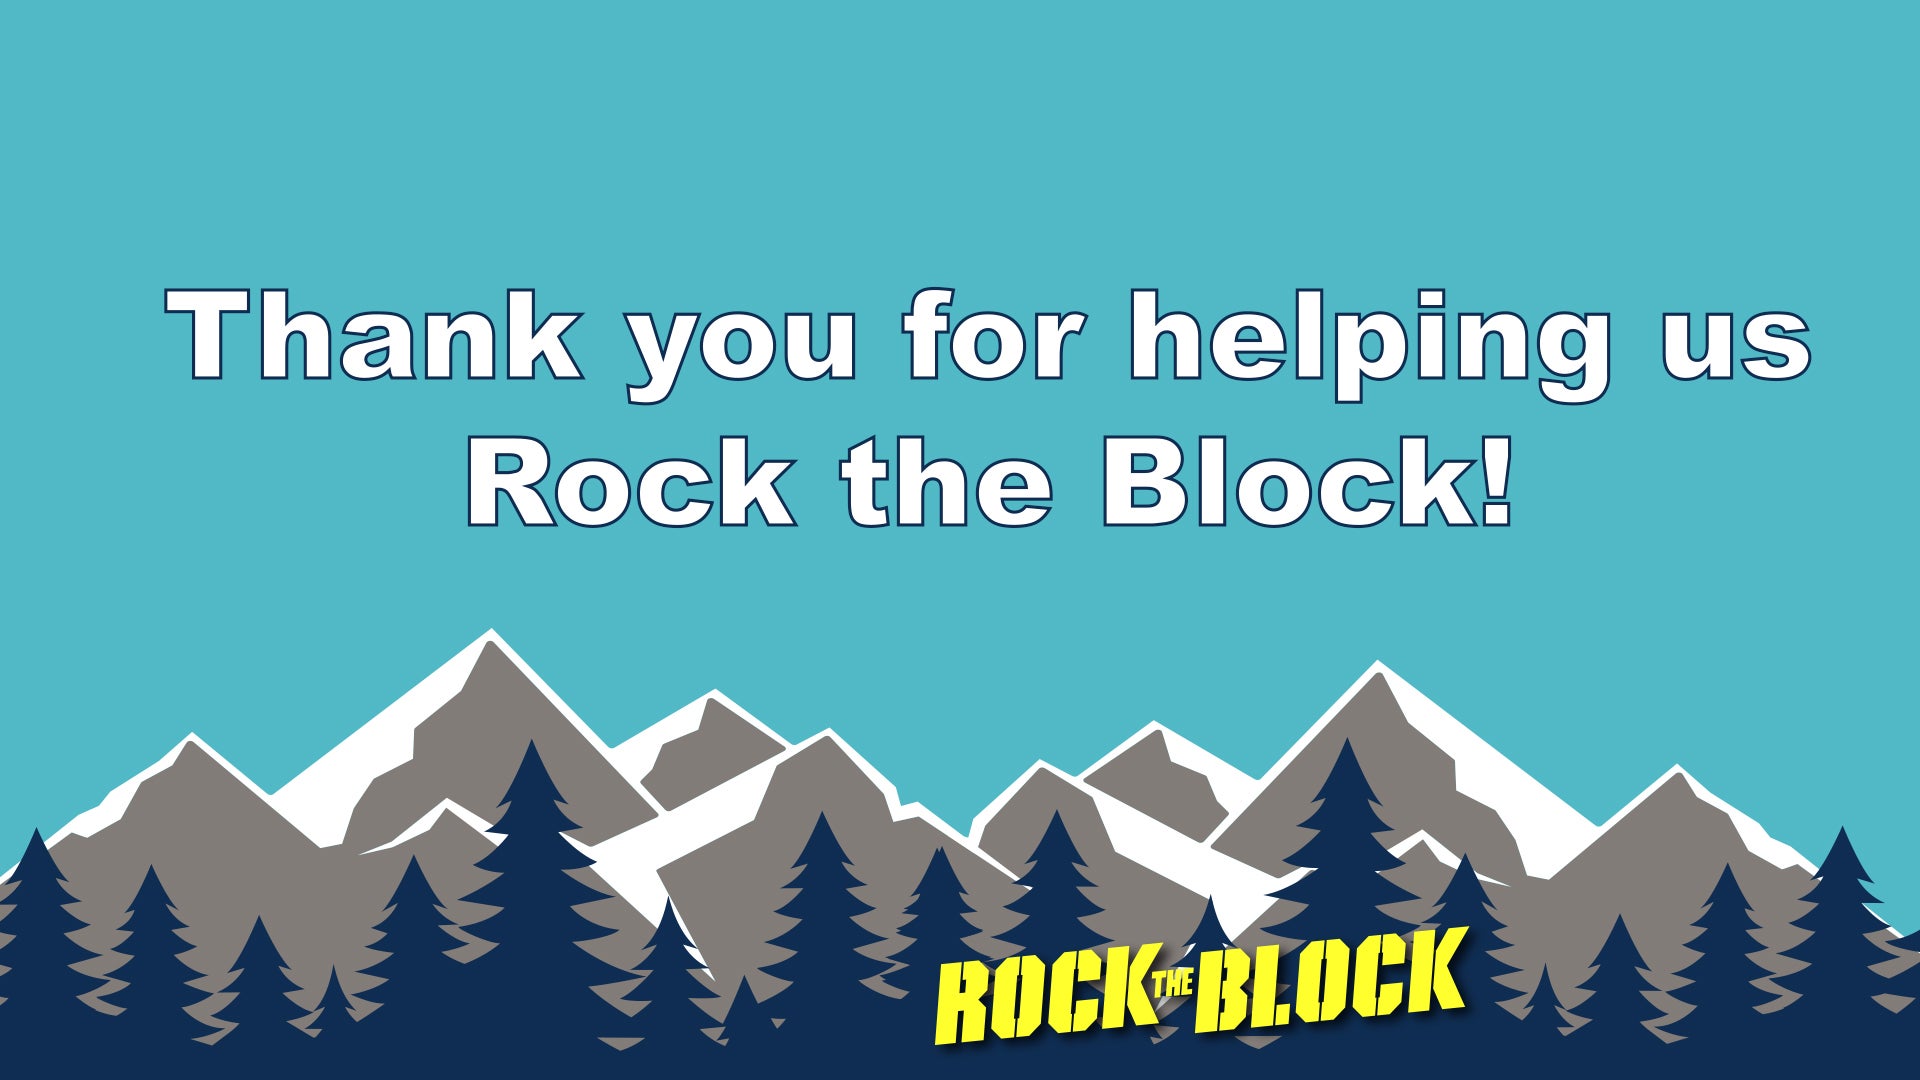 Creating the Block: Here are a few of the companies that helped make Rock the Block season 4 happen